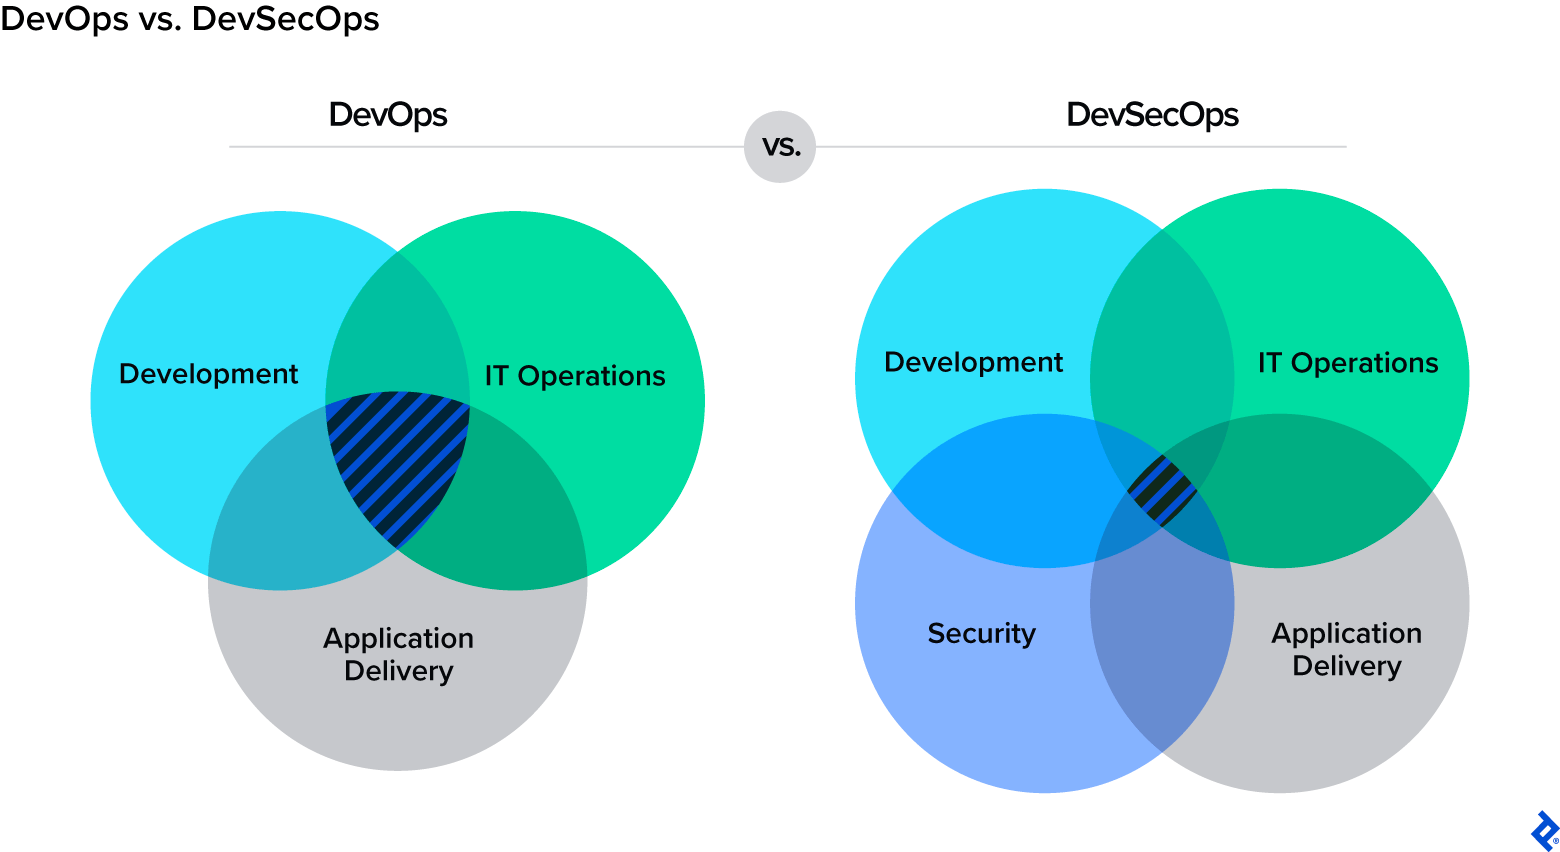 Two Venn diagrams: DevOps as the intersection of development, IT operations, and application delivery; and DevSecOps as the intersection of the three aforementioned categories plus security.